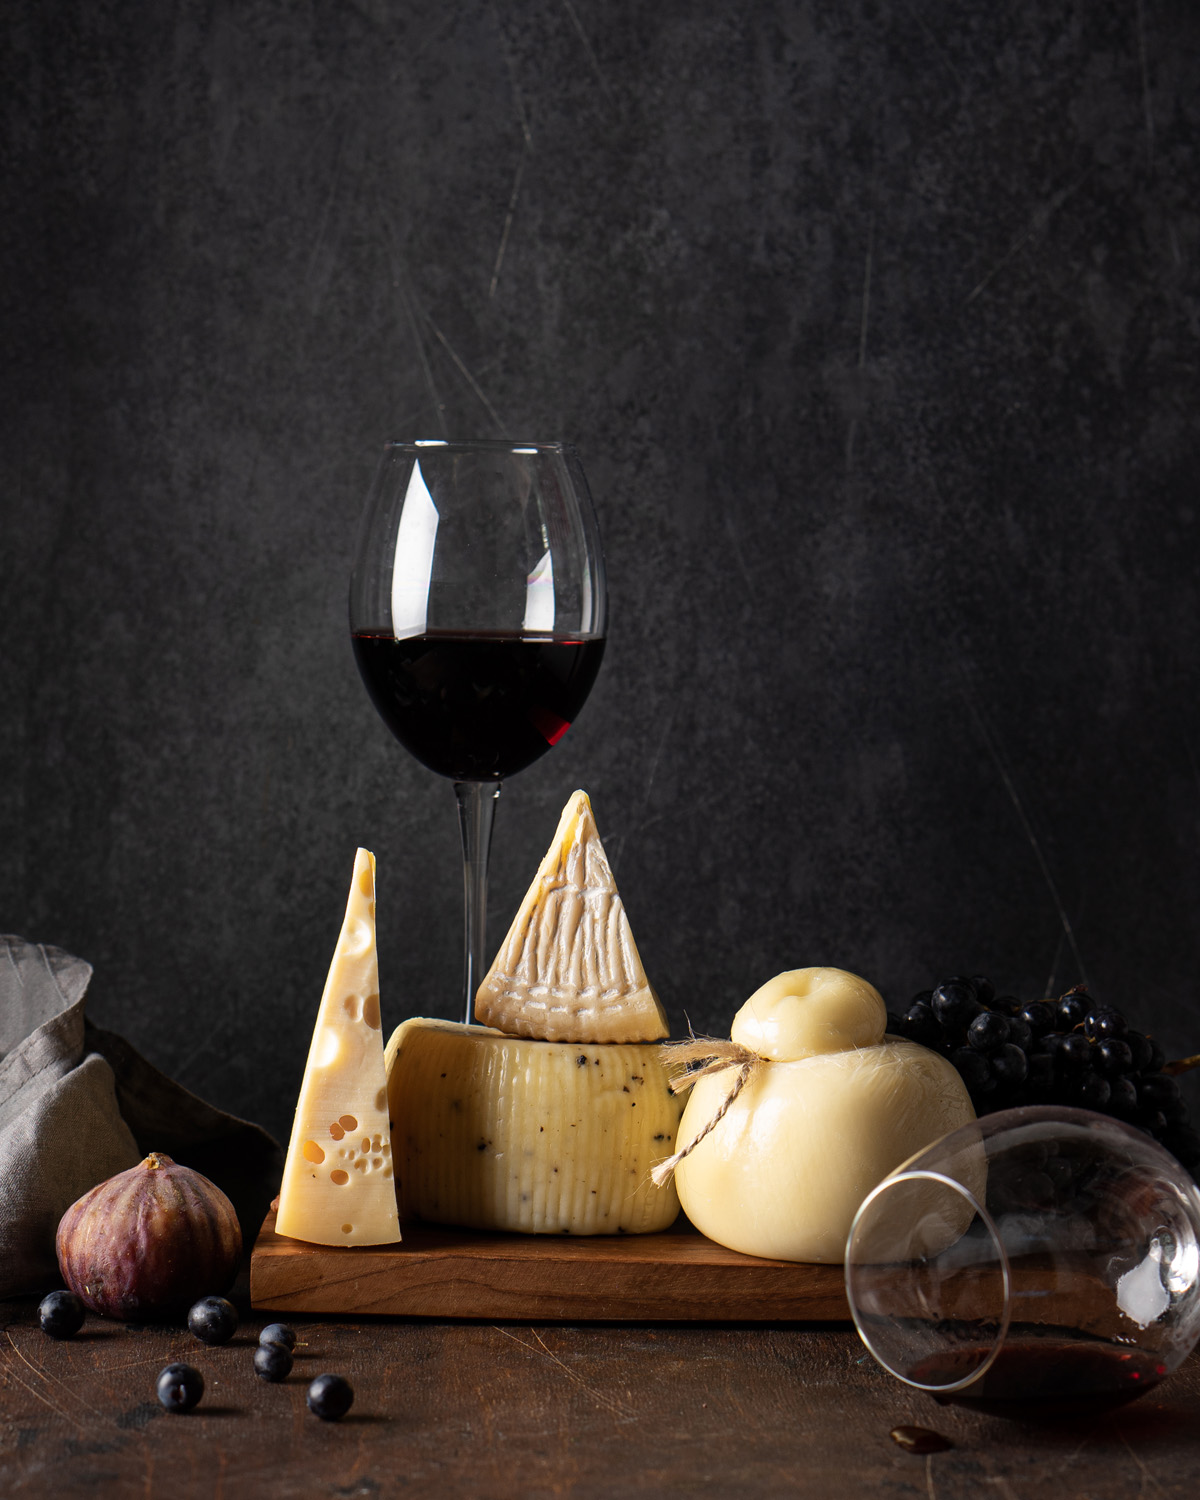 Cheese And Wine The Remarkable Still Life Photography Of Elena Otvodenko